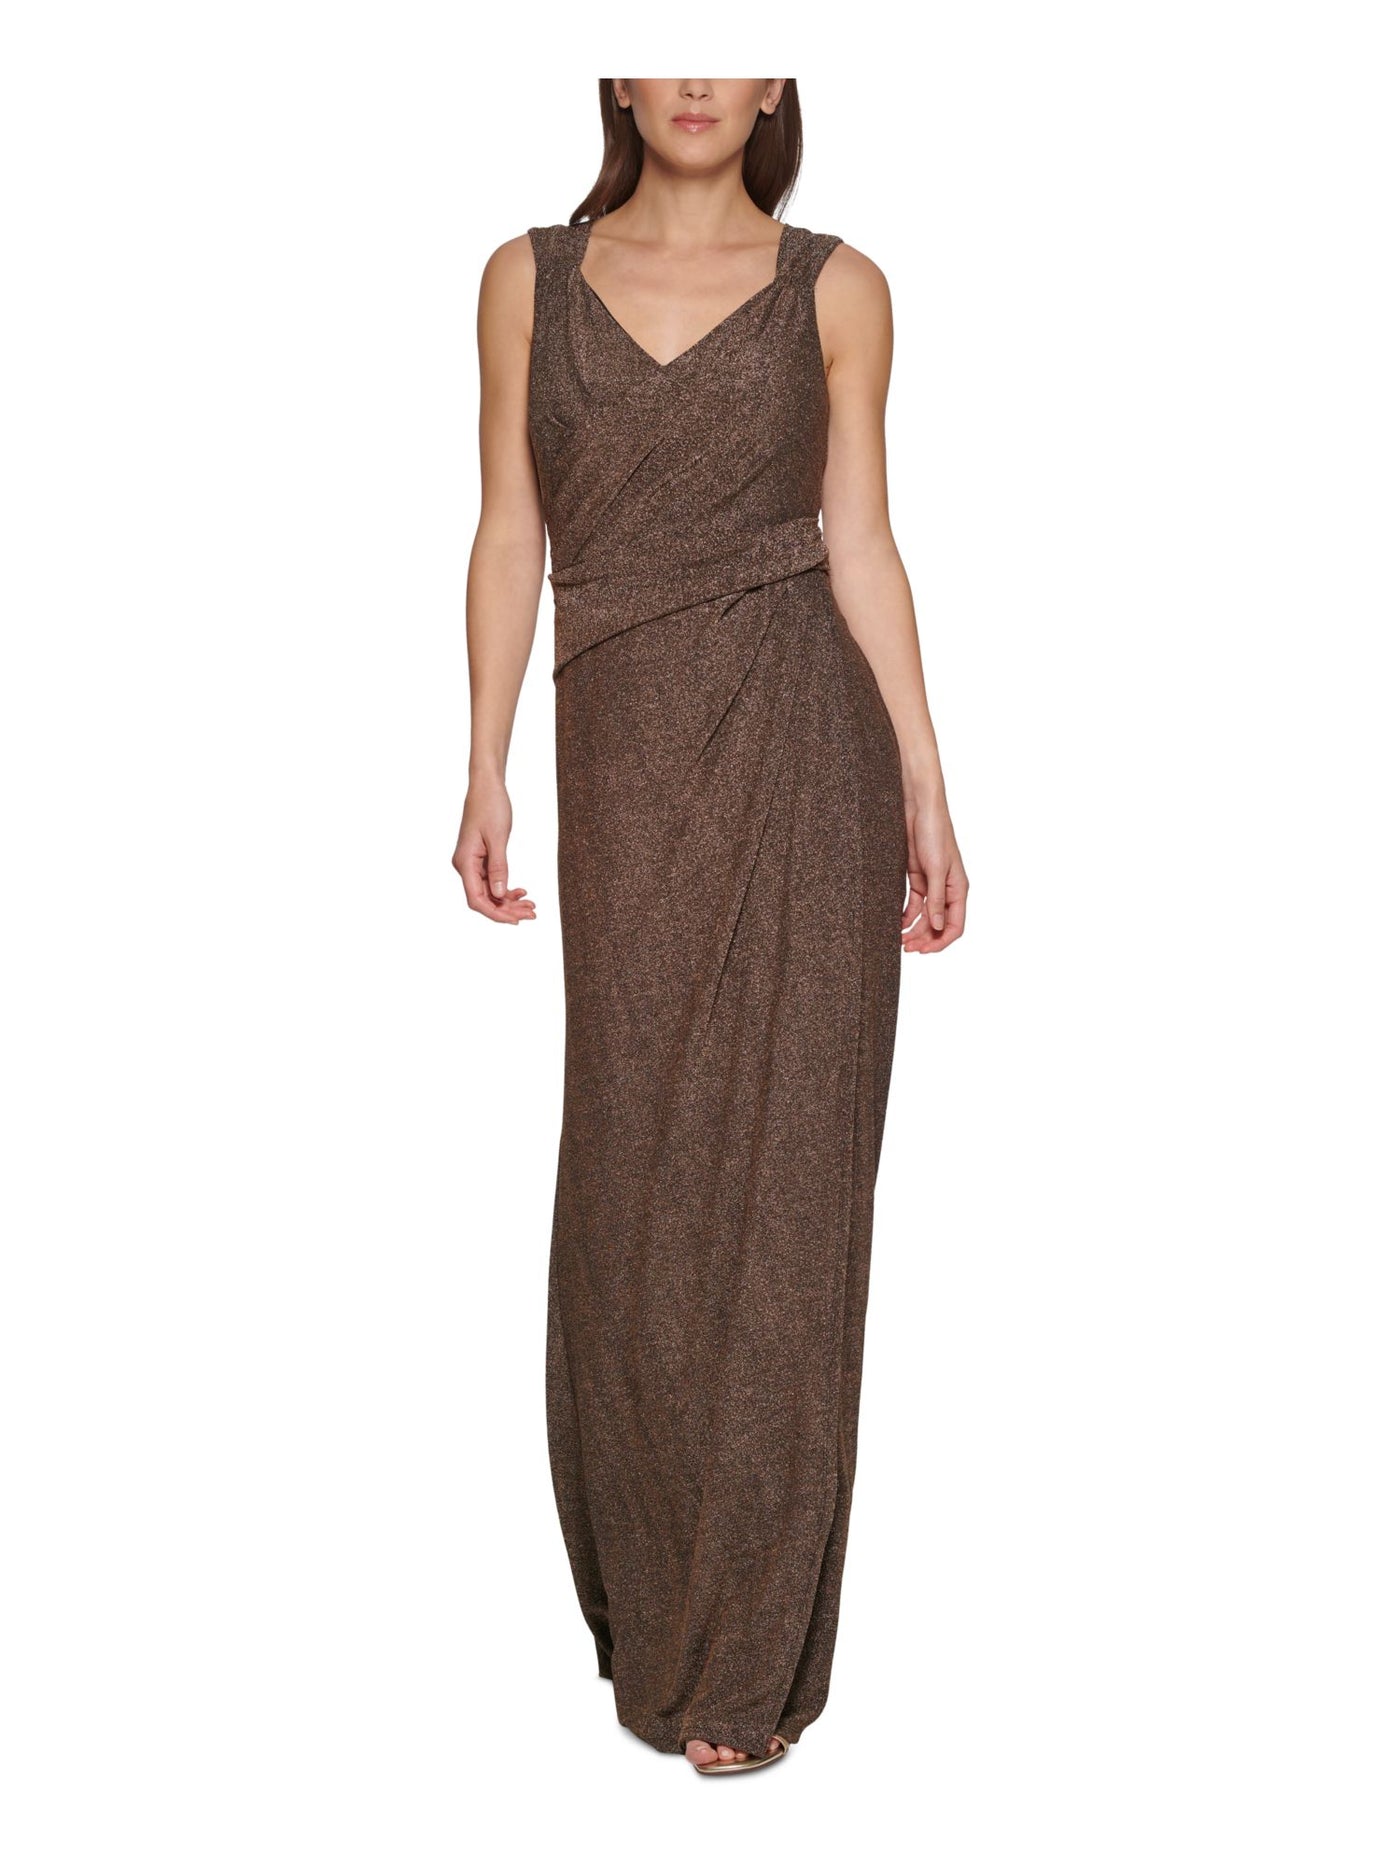 DKNY Womens Gold Ruched Zippered Draped Front Faux-wrap Skirt Sleeveless V Neck Full-Length Evening Gown Dress 10